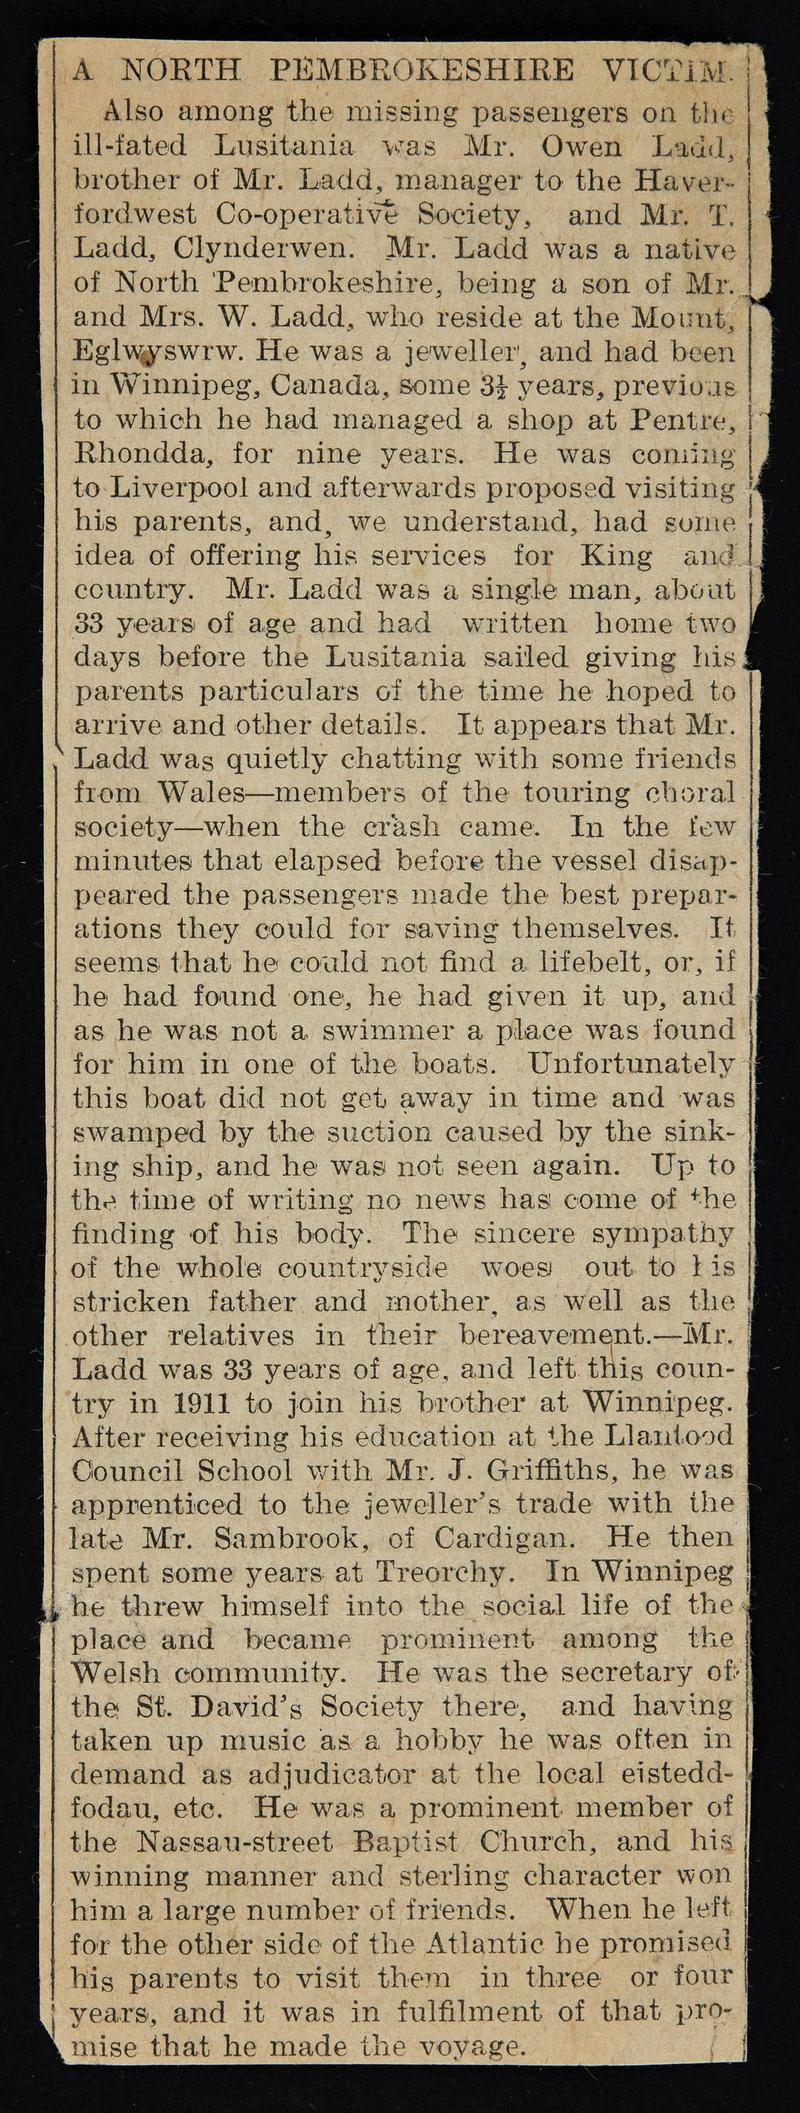 Papers concerning Owen Ladd of Winnipeg, formerly of Clynderwen, Pembrokeshire. He was a victim of the Lusitania disaster. - newspaper cutting